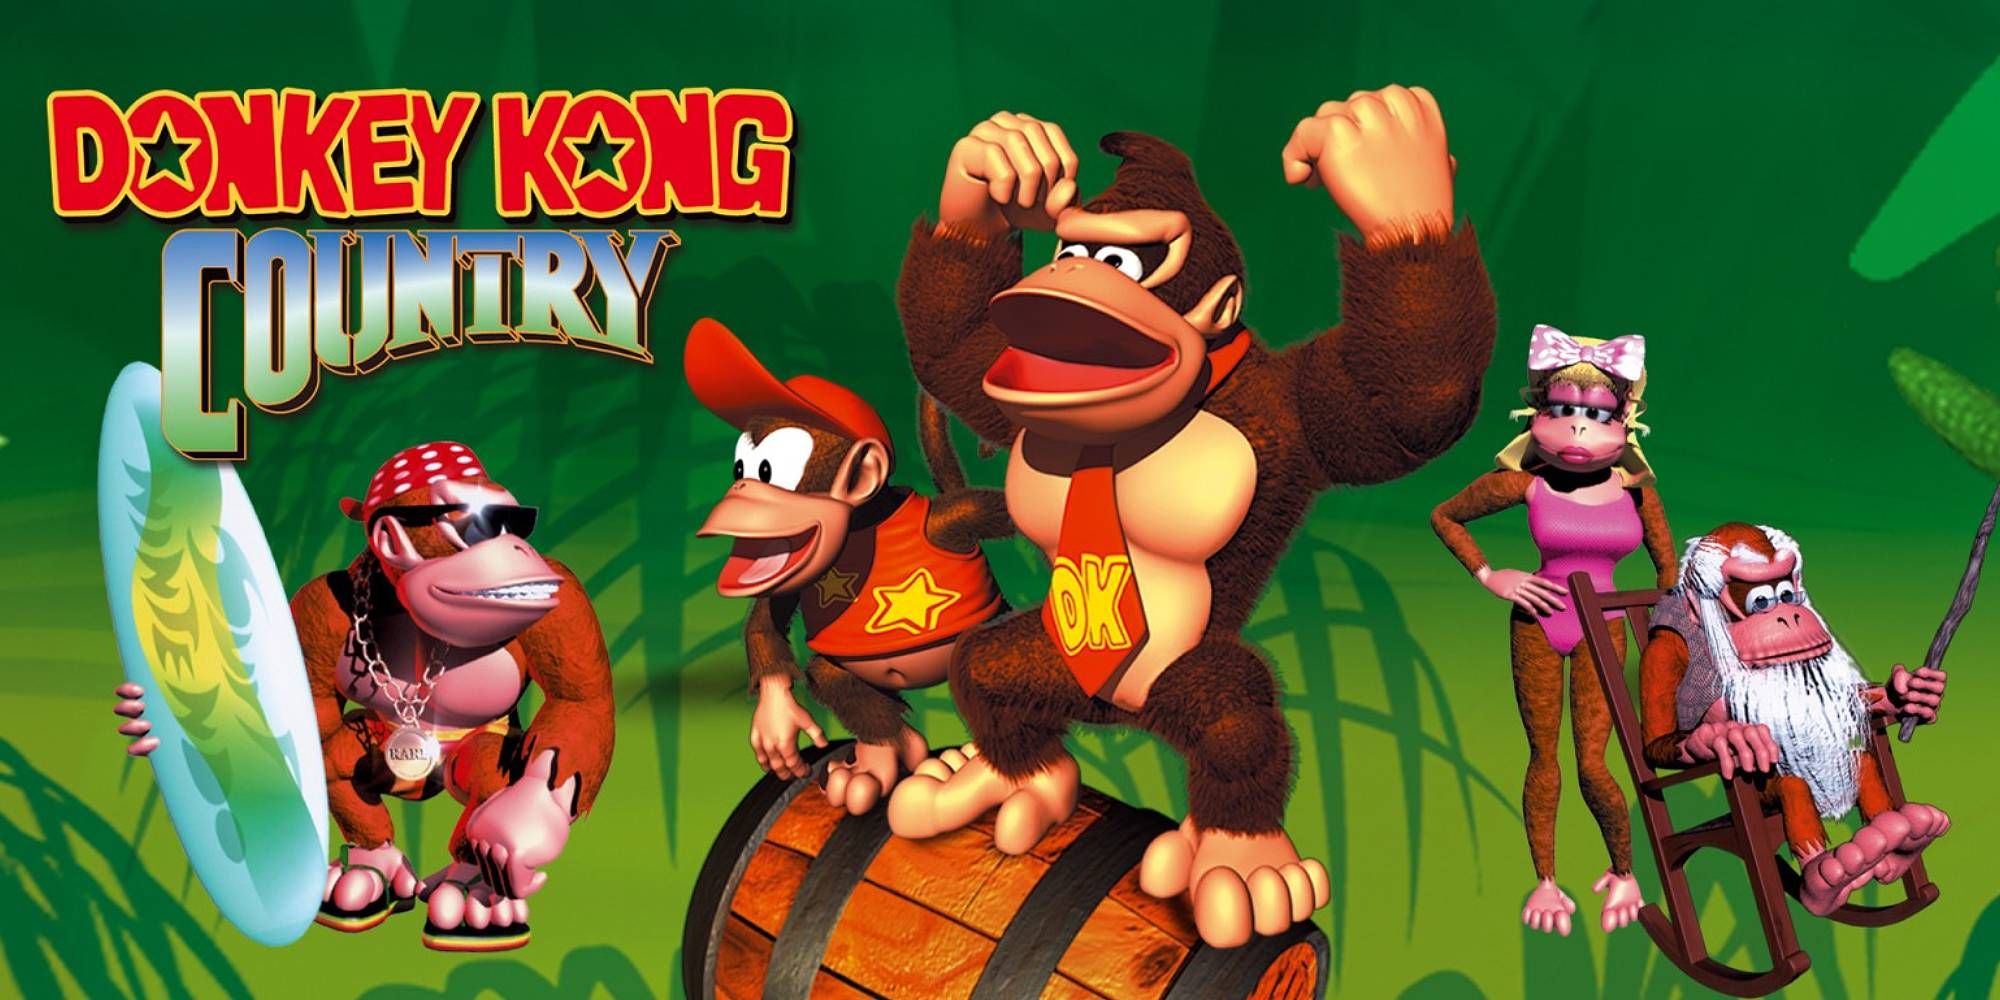 Donkey Kong Country cover art features a number of cartoon apes posing in various styles